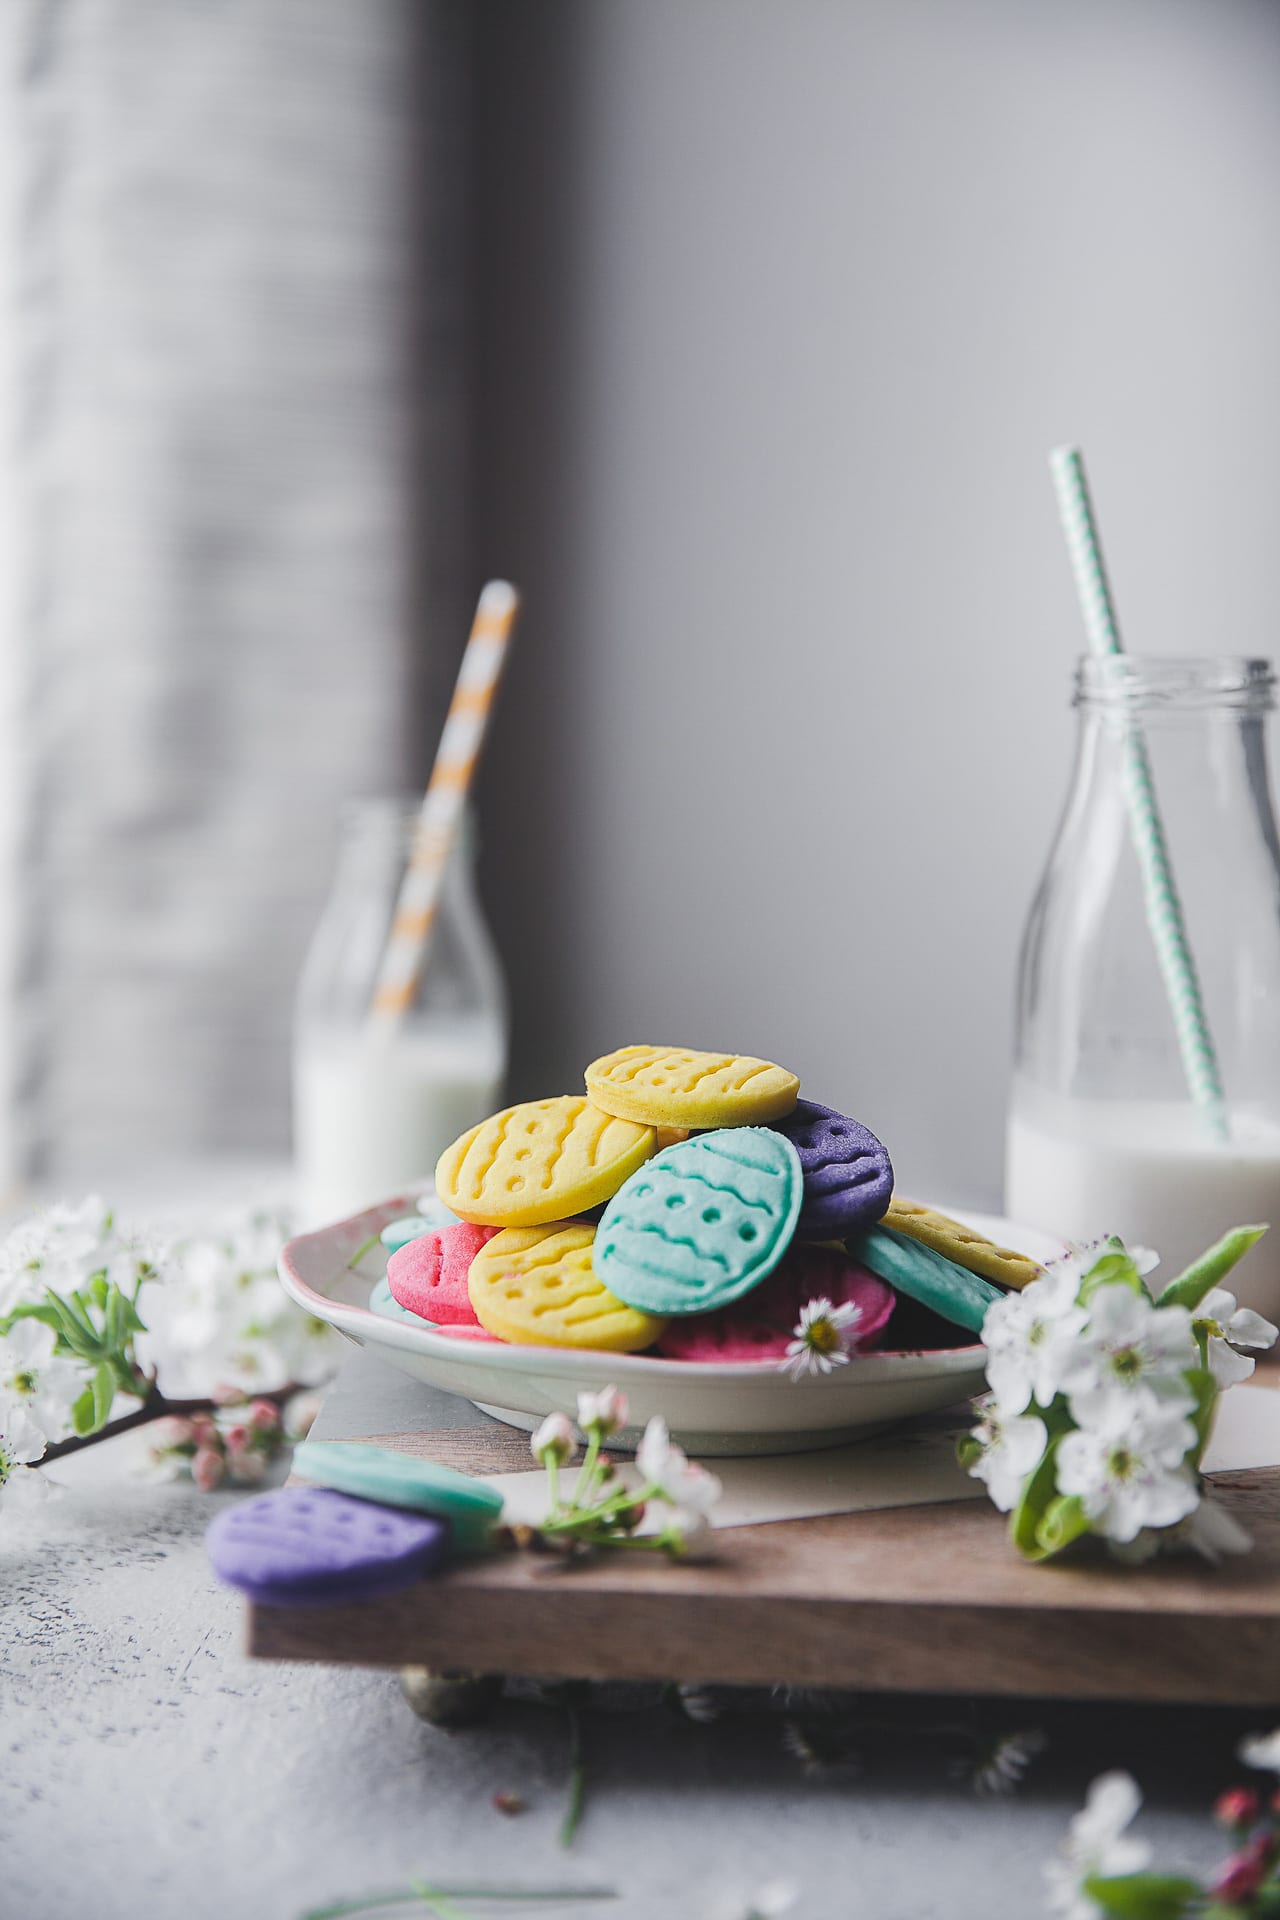 Soft Chewy Easy to bake with Kids - Cream Cheese Easter Egg Cookies #cookies #easteregg #cream #cheese #baking #kids #easter #egg